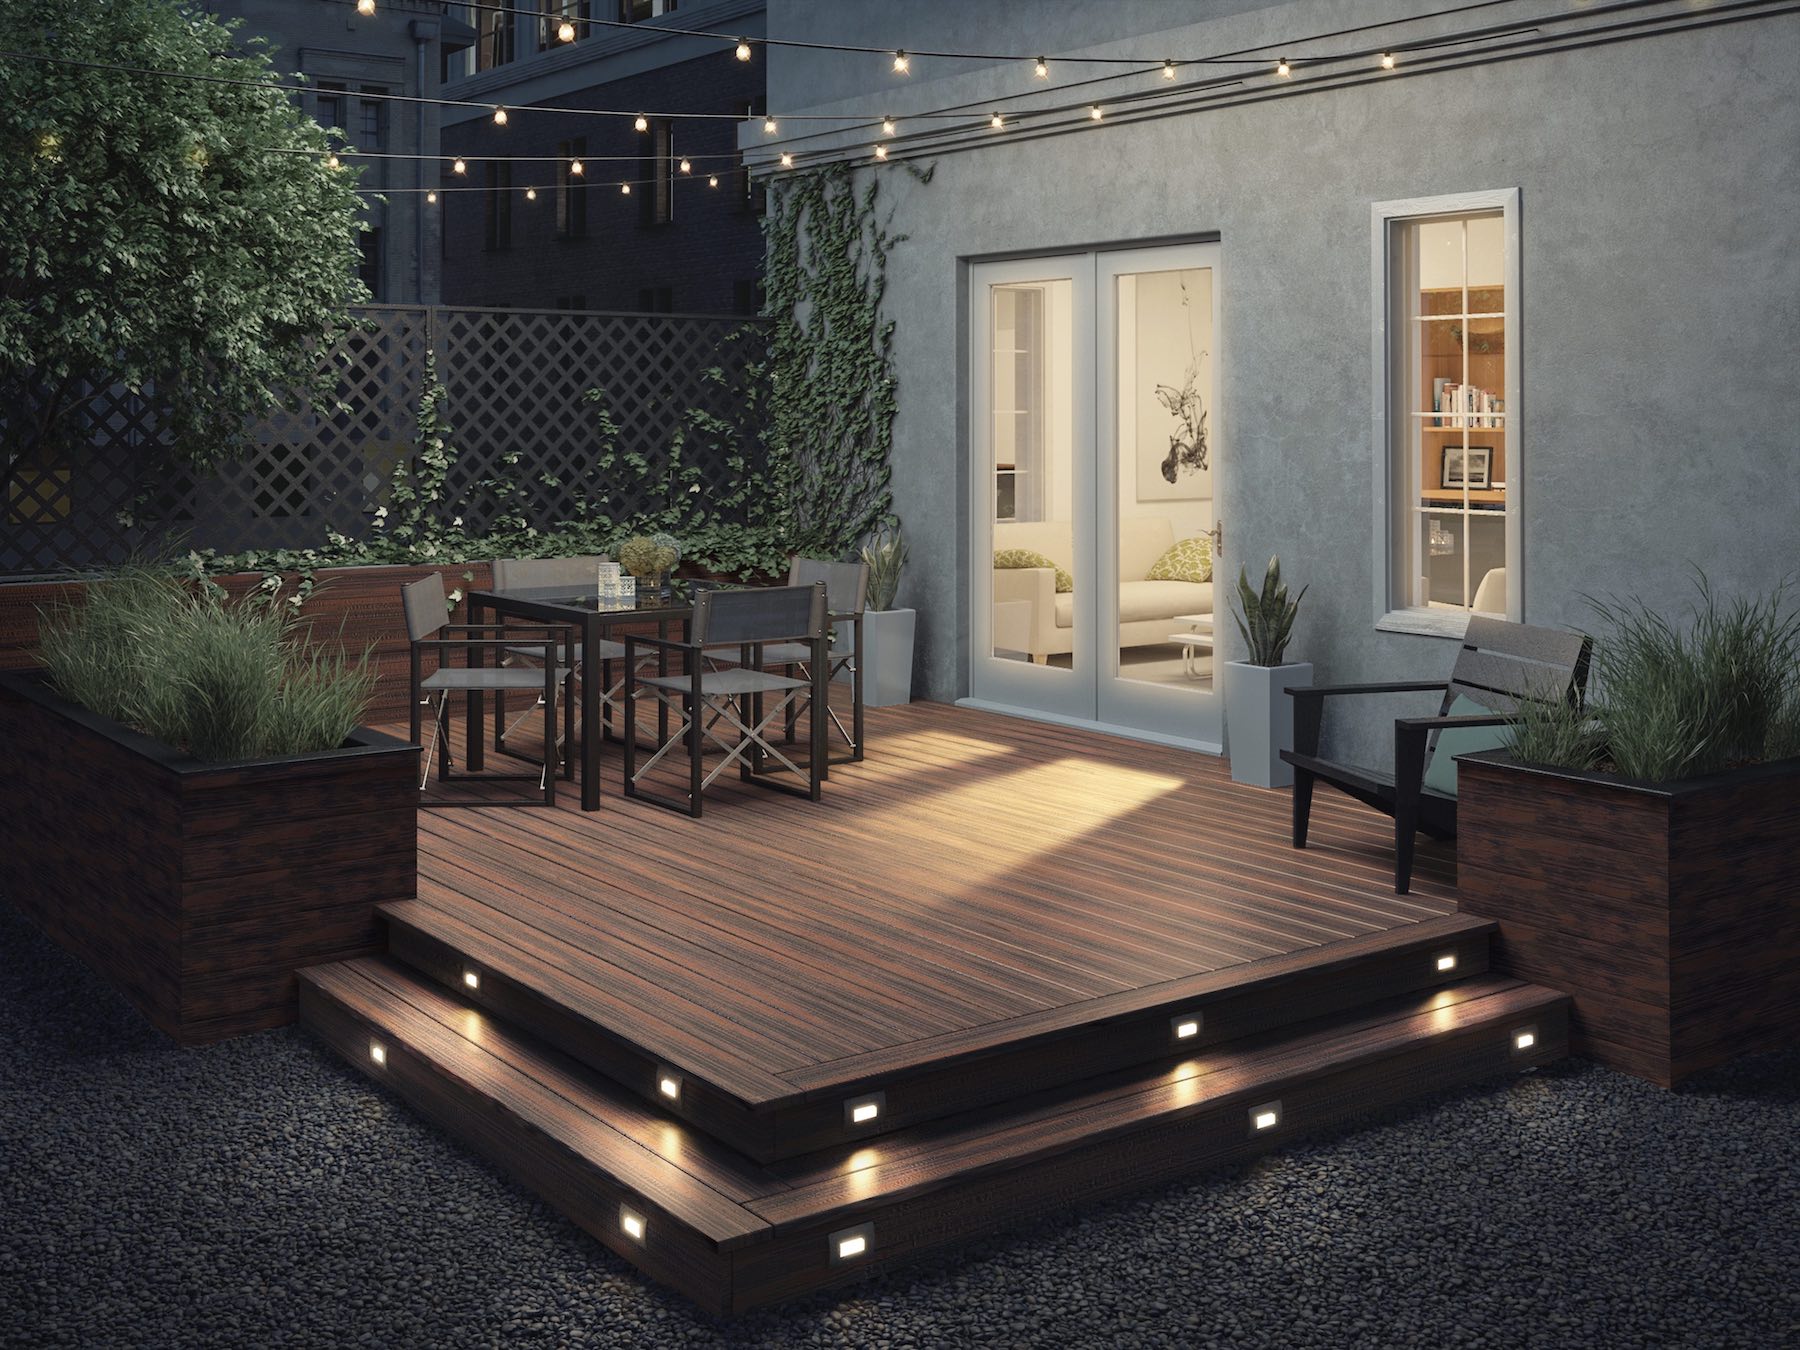 Deckorators by Hinkley Lighting, a new line for outdoor living that offers a wide selection of 12-volt LED post cap, step light 